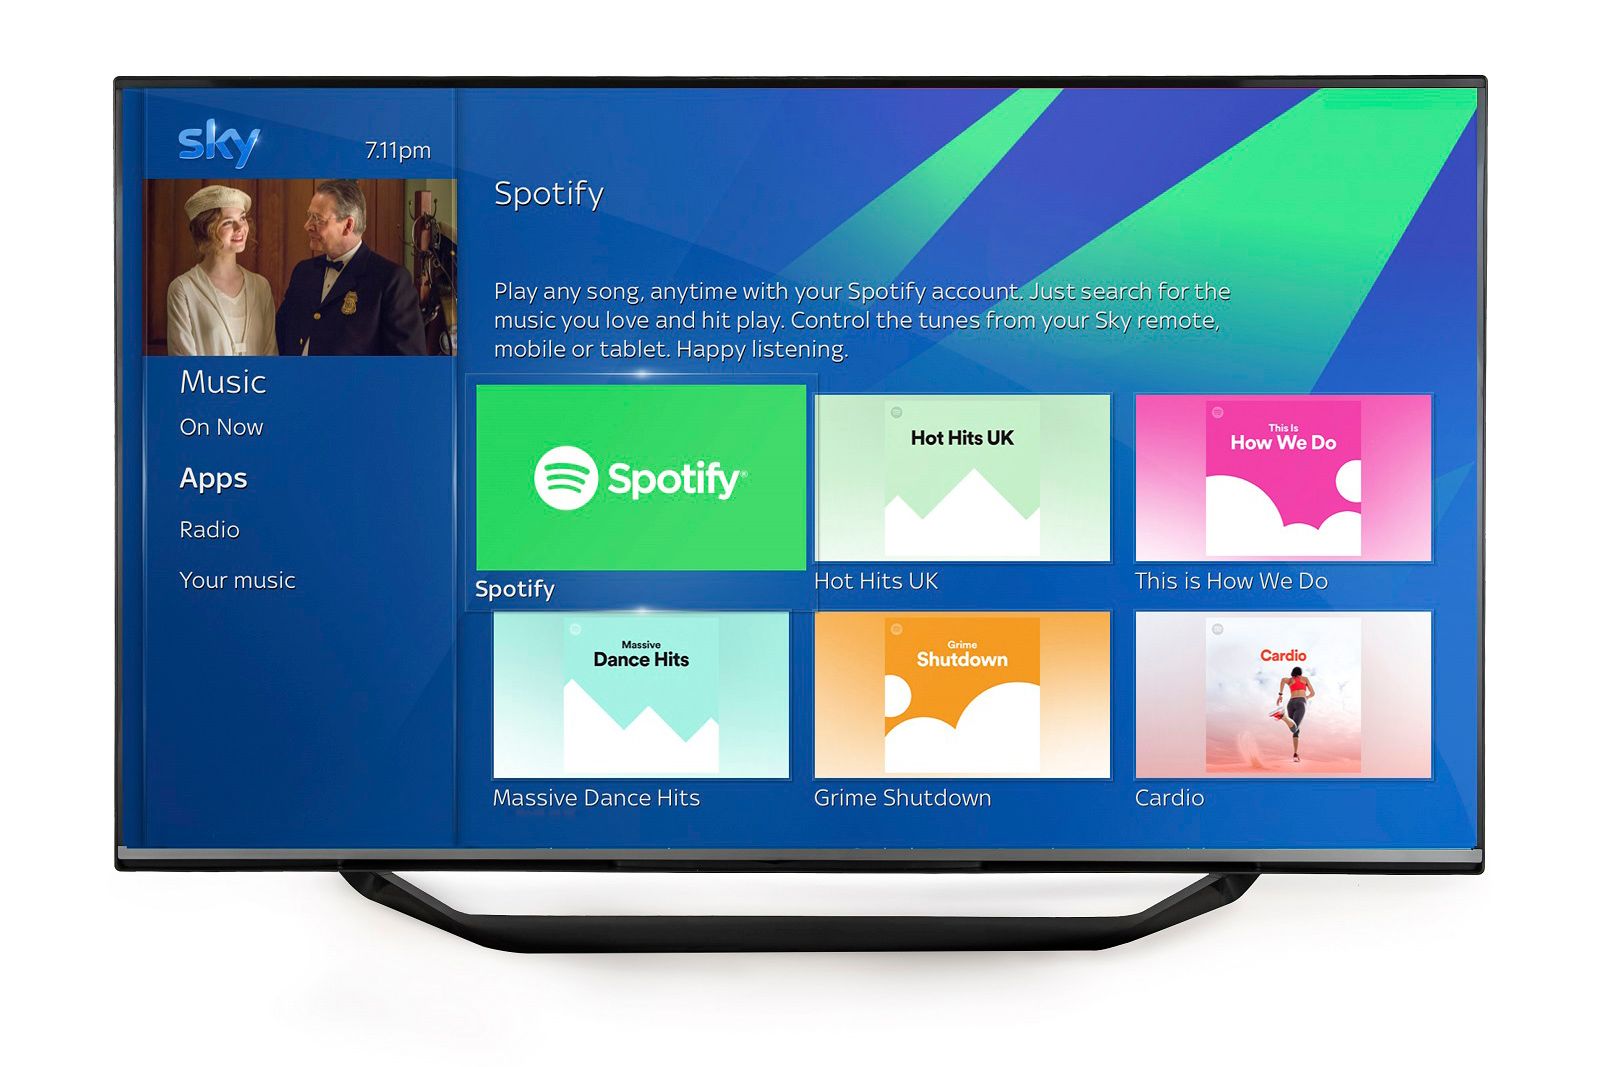 Sky Q getting loads of new features from March including Spotify and more 4K content image 2